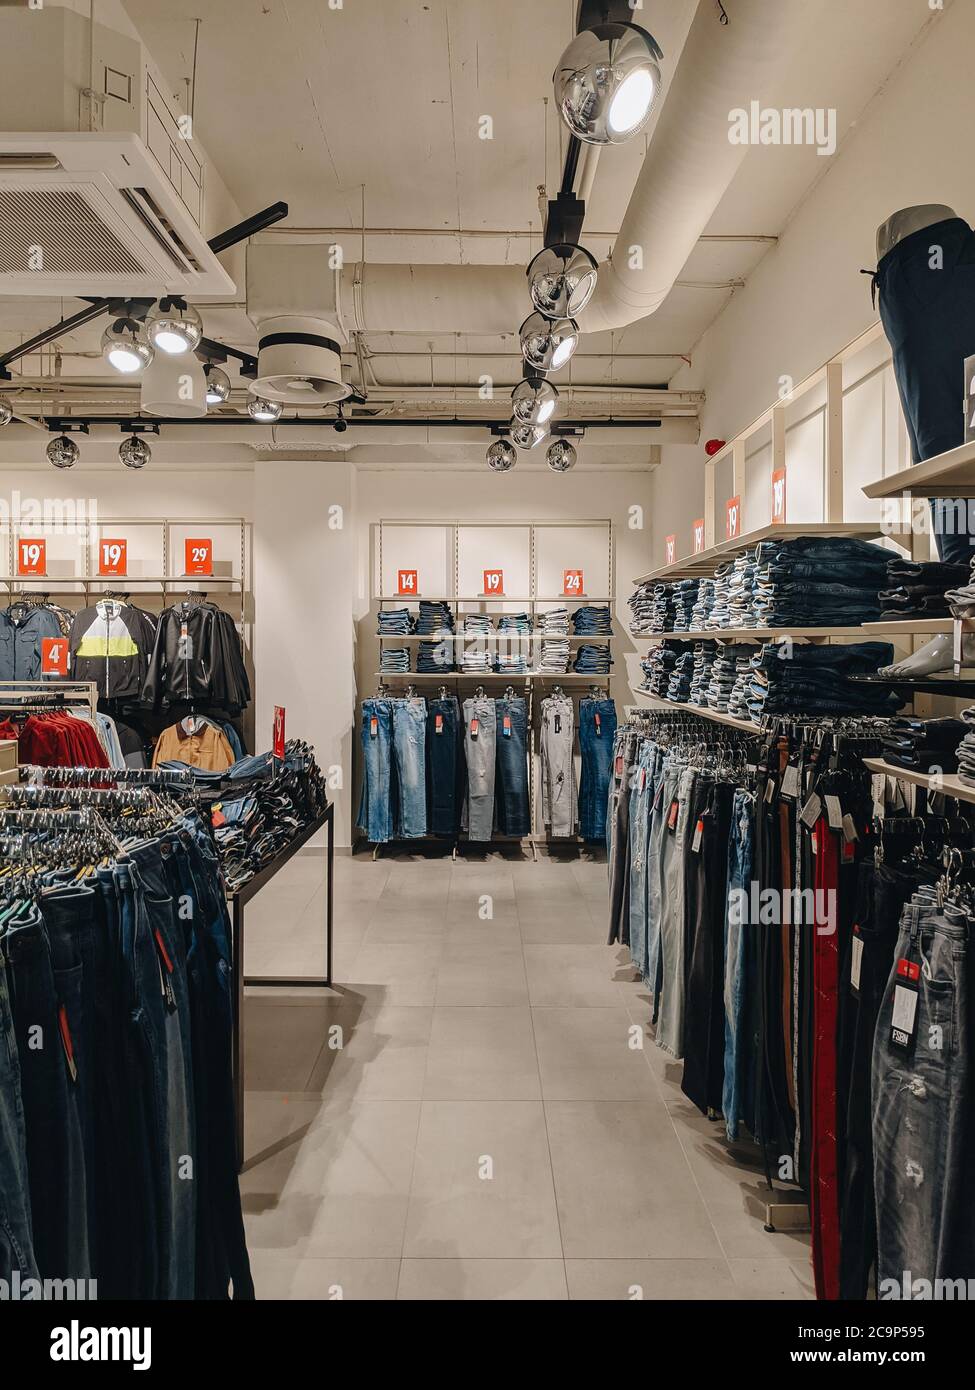 Budva, Montenegro - 01 august 2020: Jeans in the store. The goods are on the shelves. Stylish fashion boutique. Stock Photo